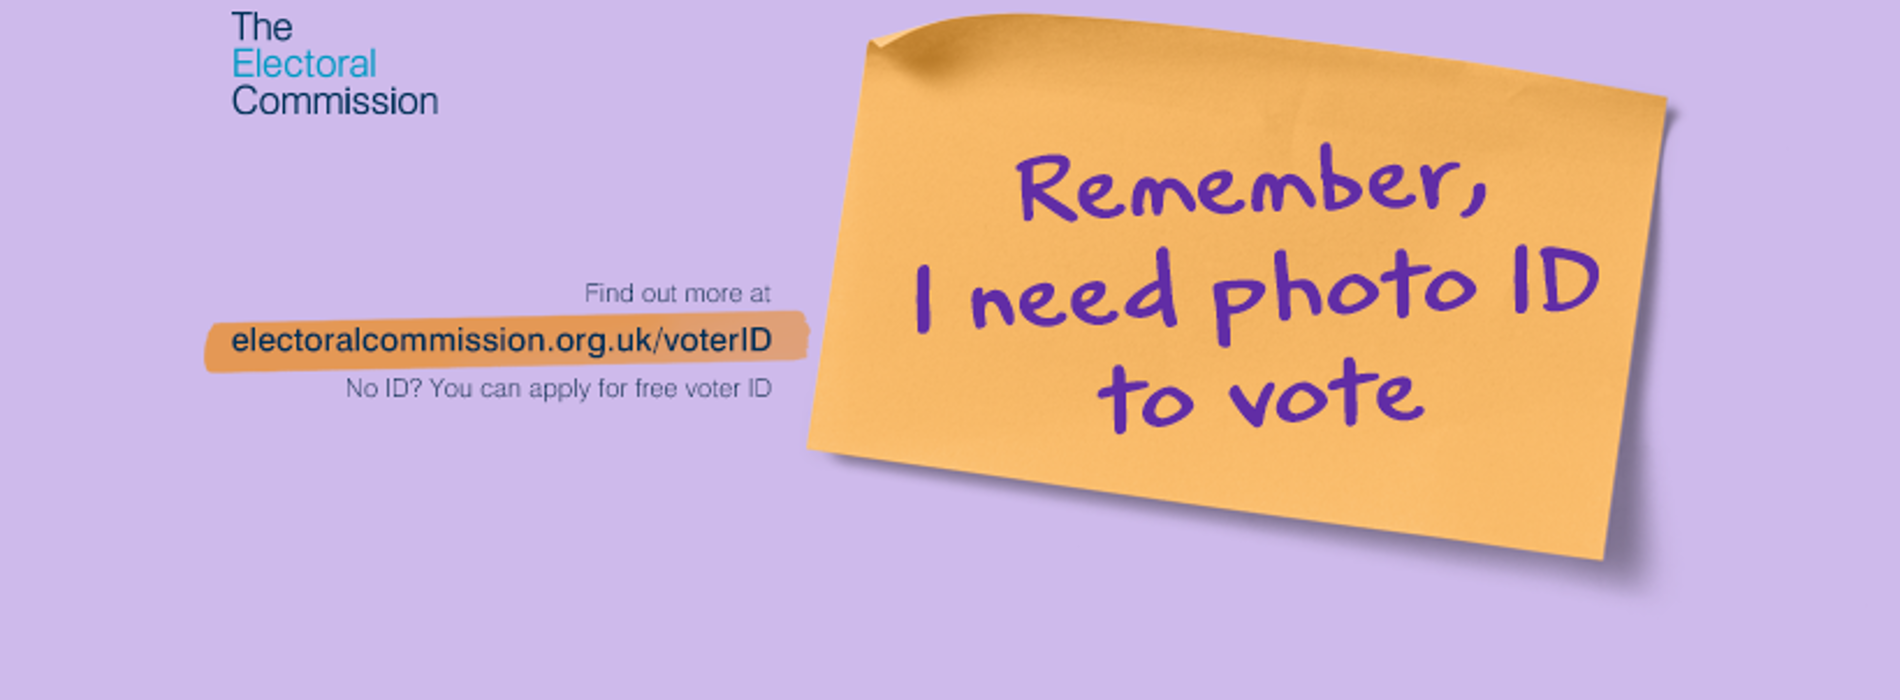 Find out more about Voter ID requirements